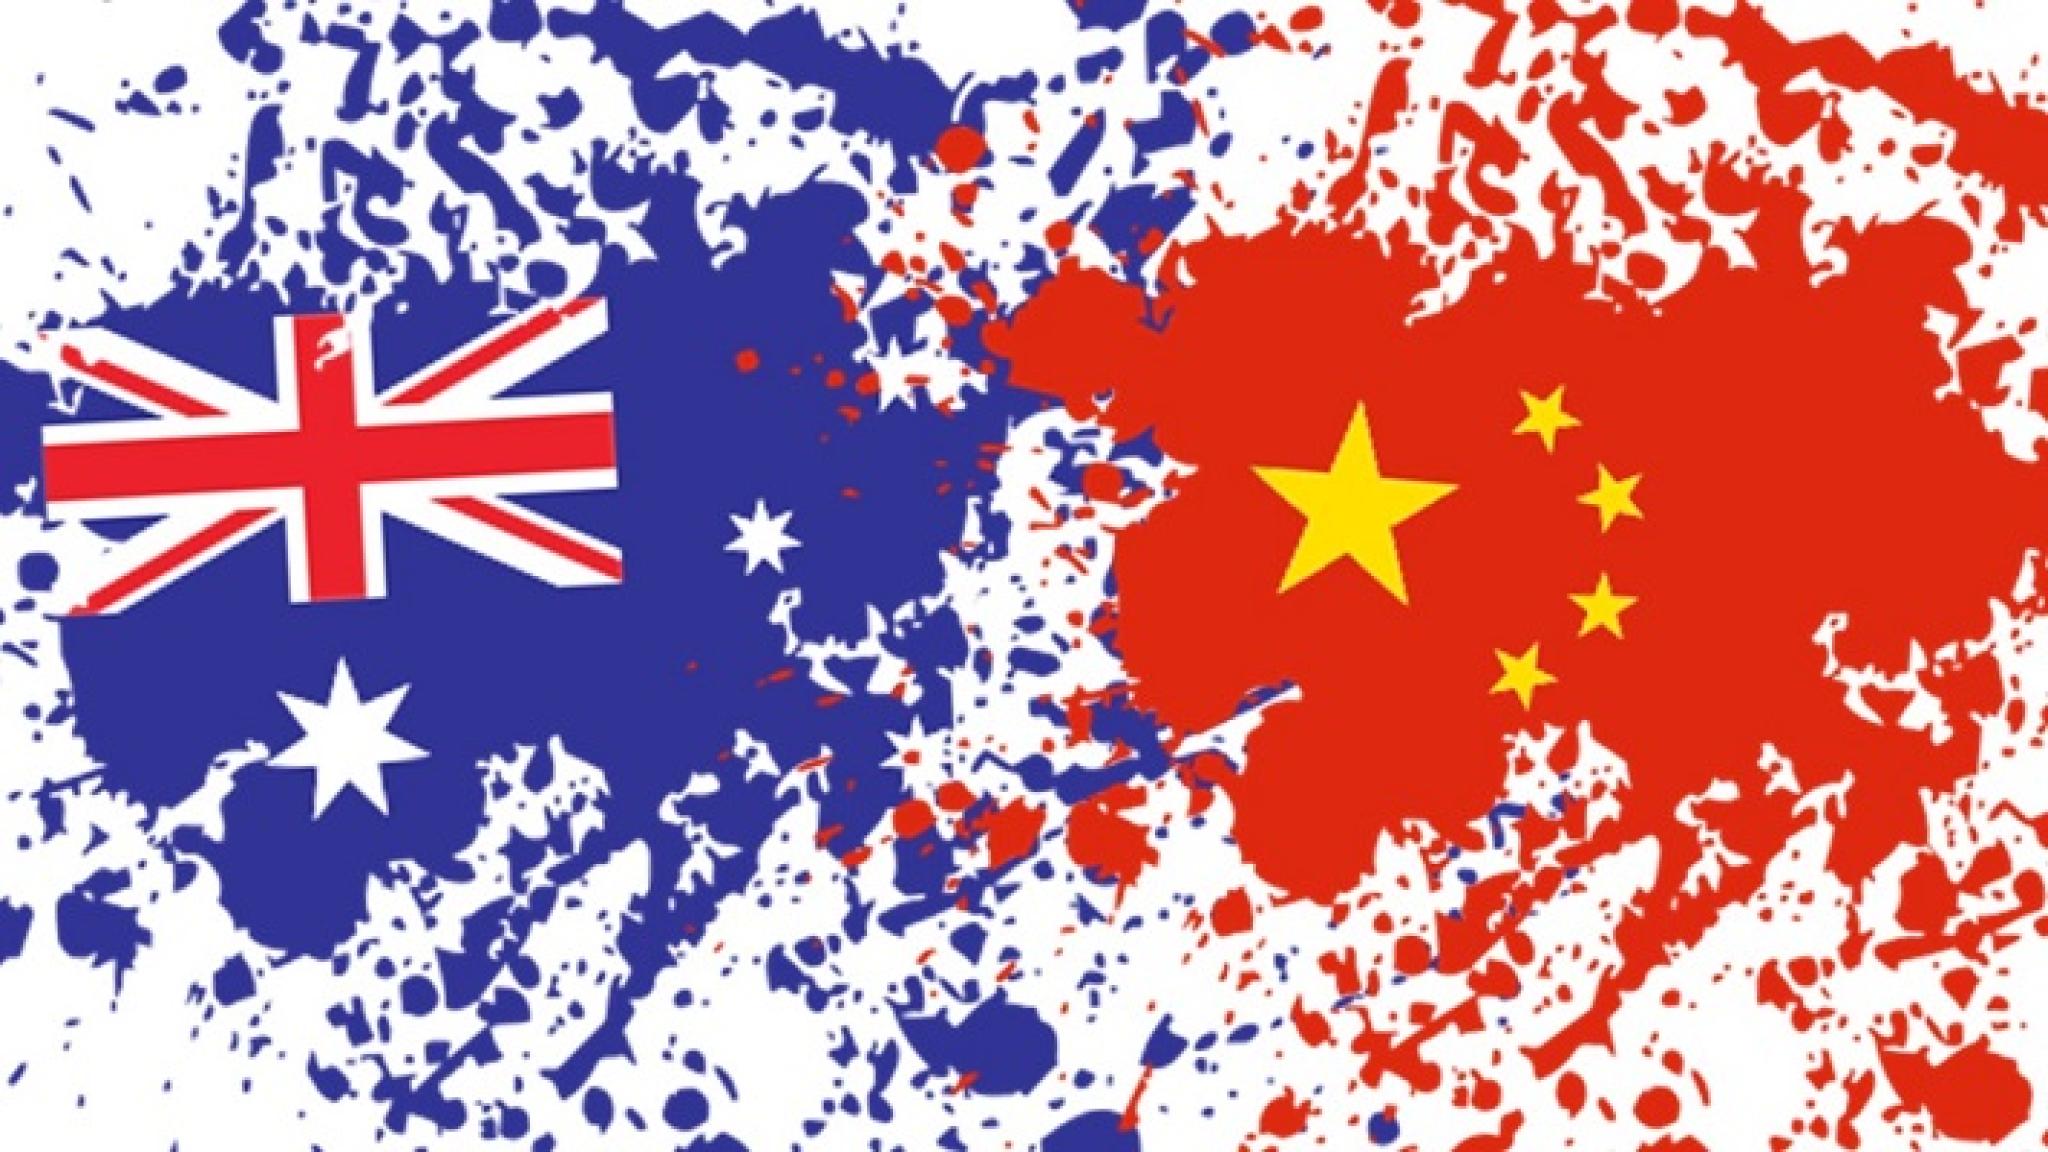 Image of Chinese and Australian flags illustrated on inksplashes from https://freesvg.org/australian-flag-ink-splatter and https://freesvg.org/chinese-flag-grunge-ink (CC0 1.0) 